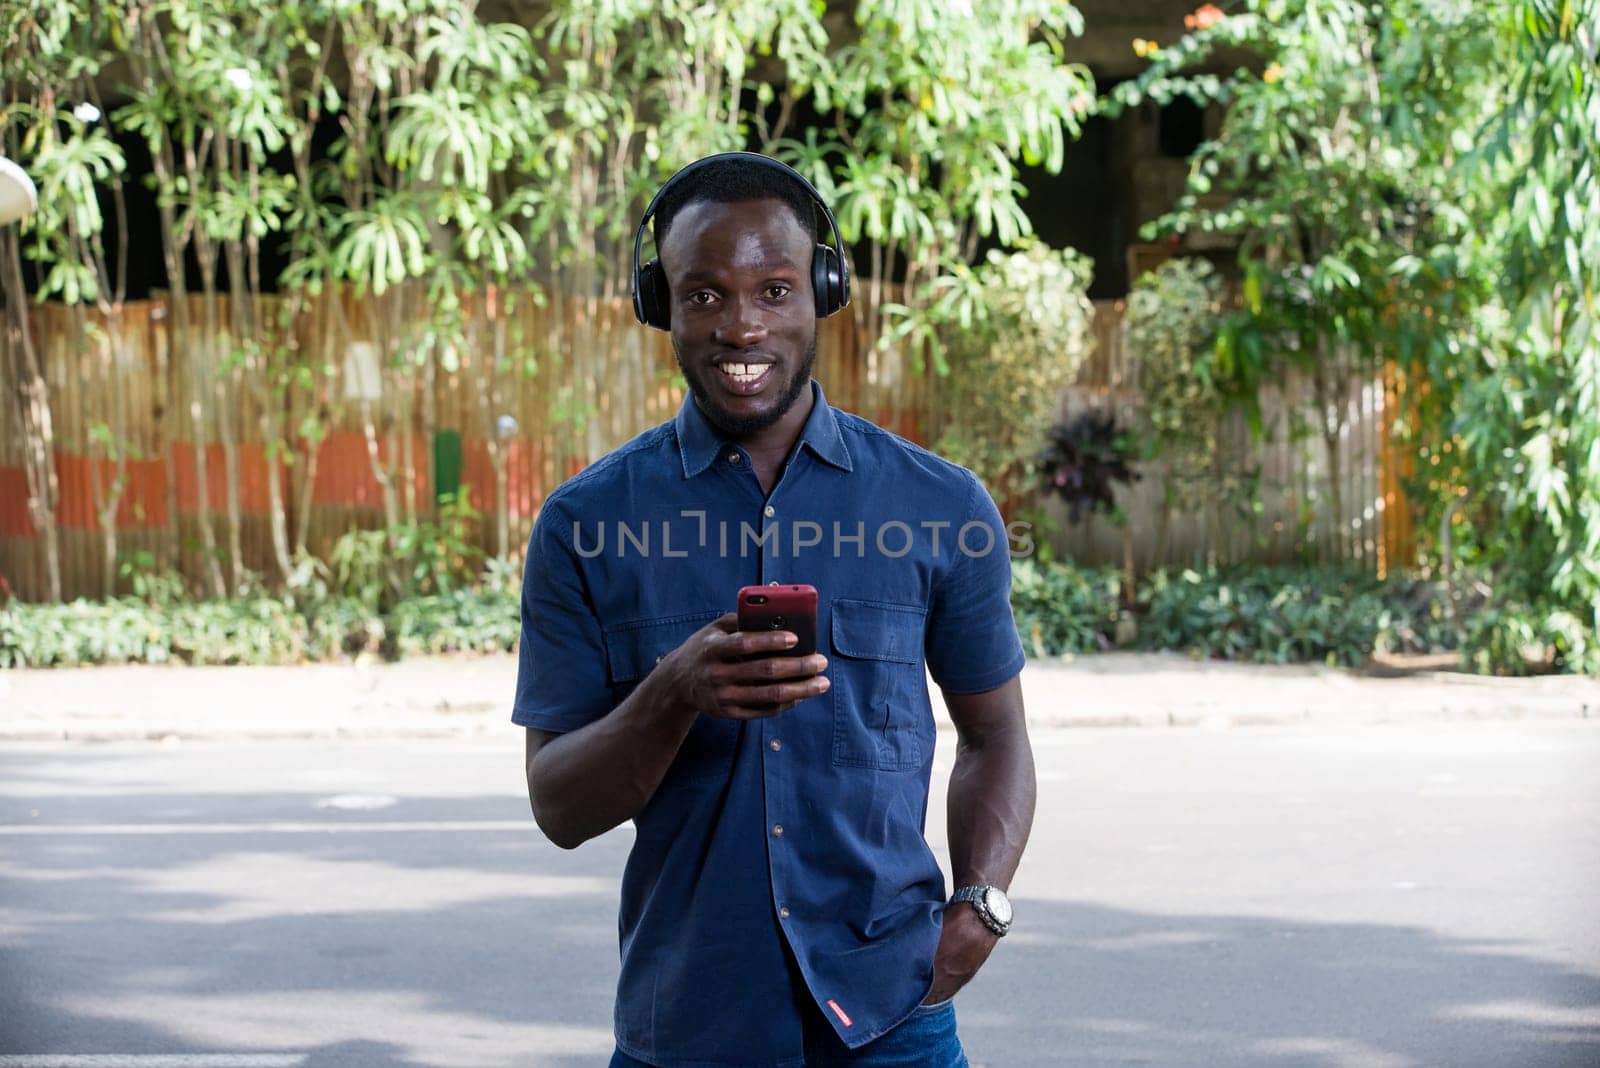 Man listens to music with headphones using a mobile phone outdoors.